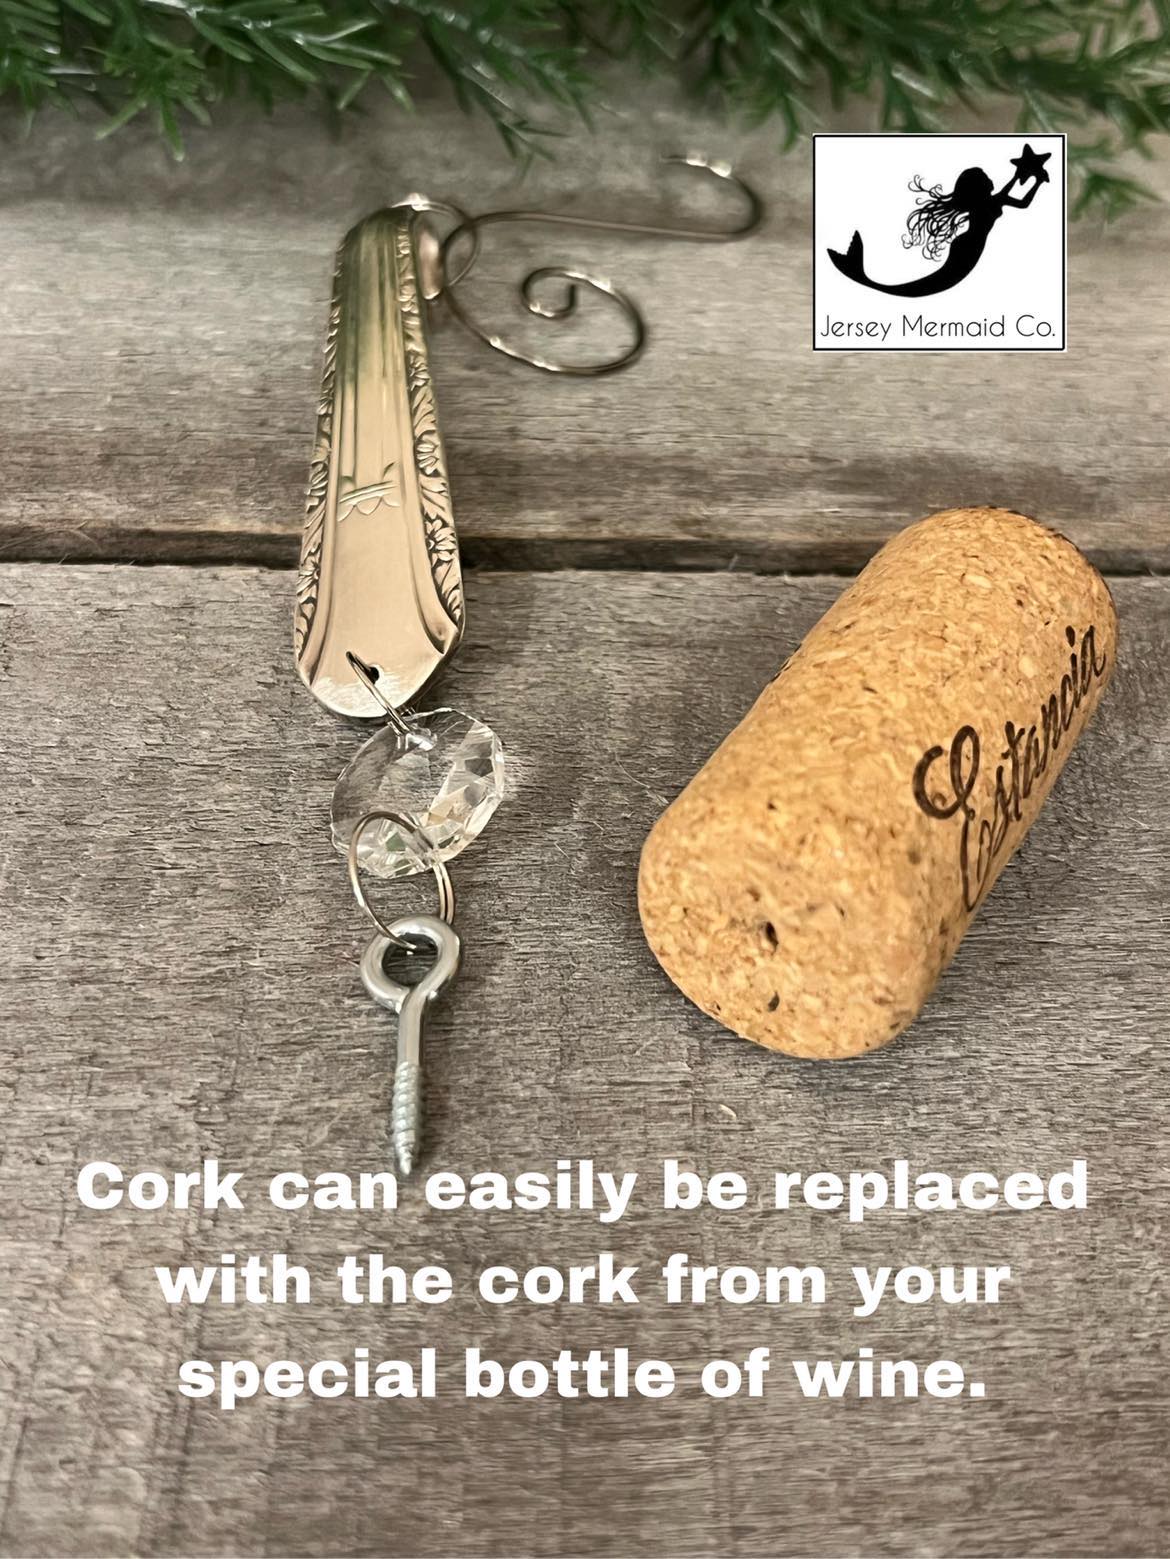 If you choose to replace the cork on the ornament, simply unscrew and replace.